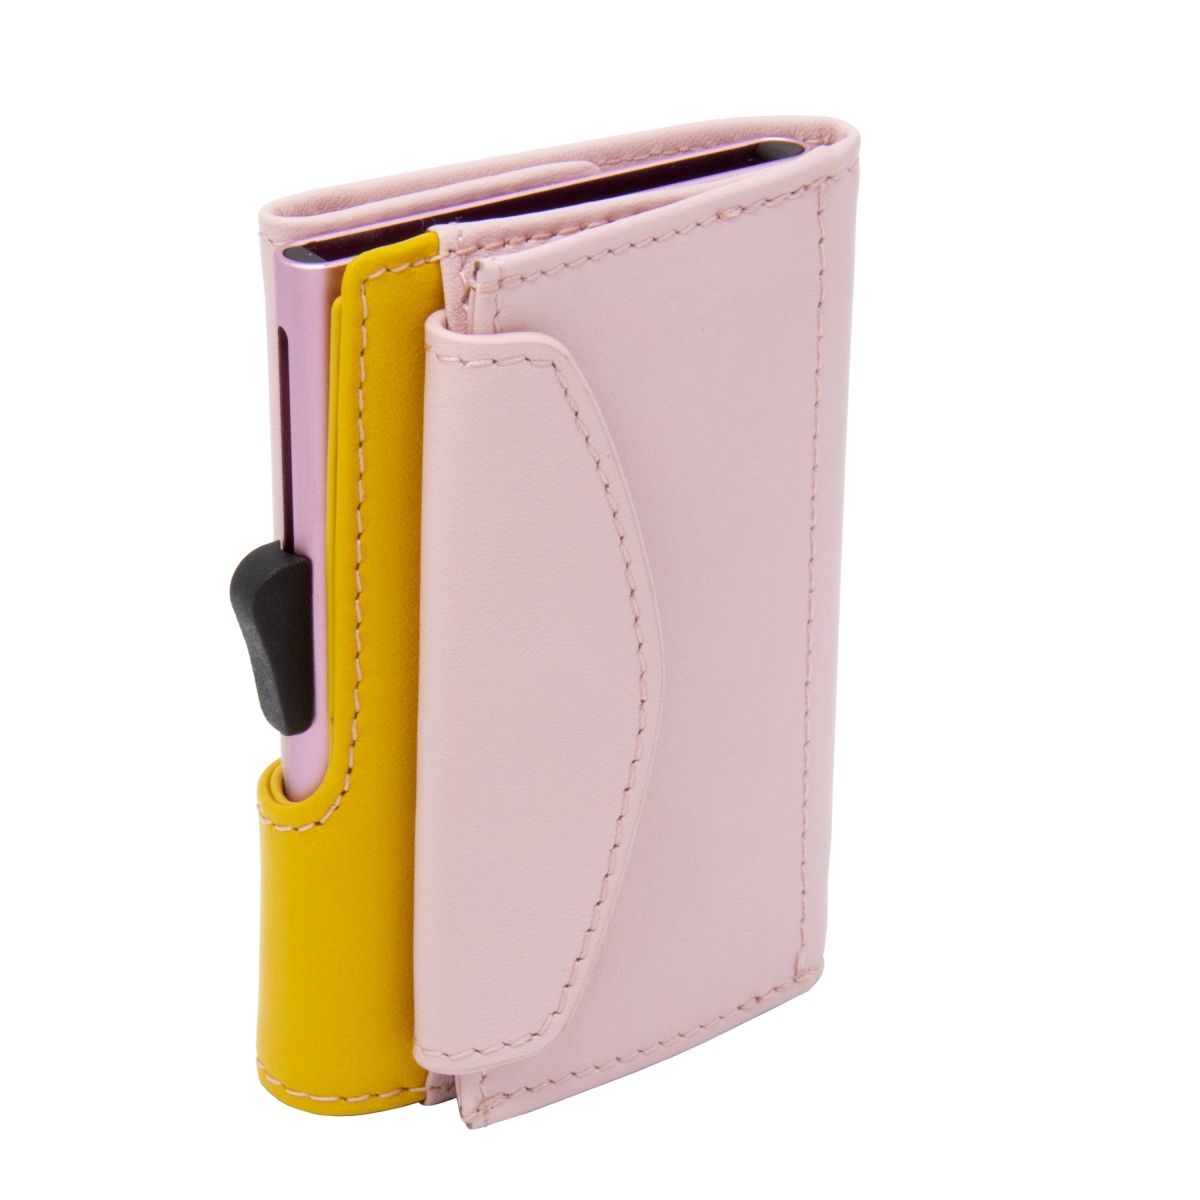 C-Secure Aluminum Card Holder with Genuine Leather and Coin Pouch - Blush/Saffron